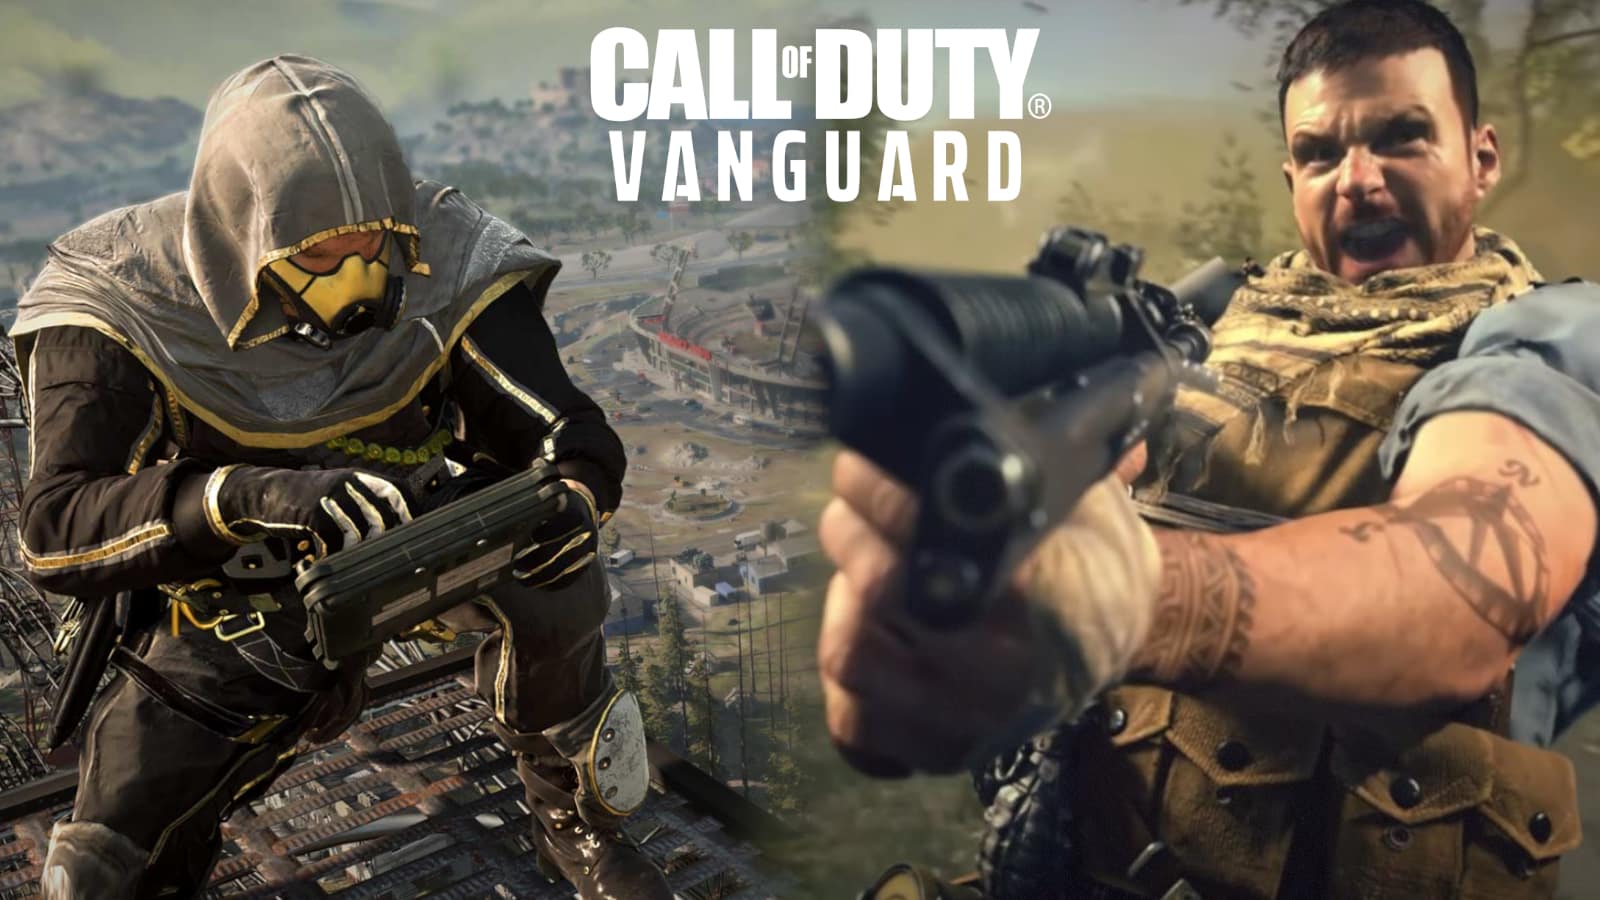 CoD Vanguard $110k tourney team disbands after player dropped for alleged cheater